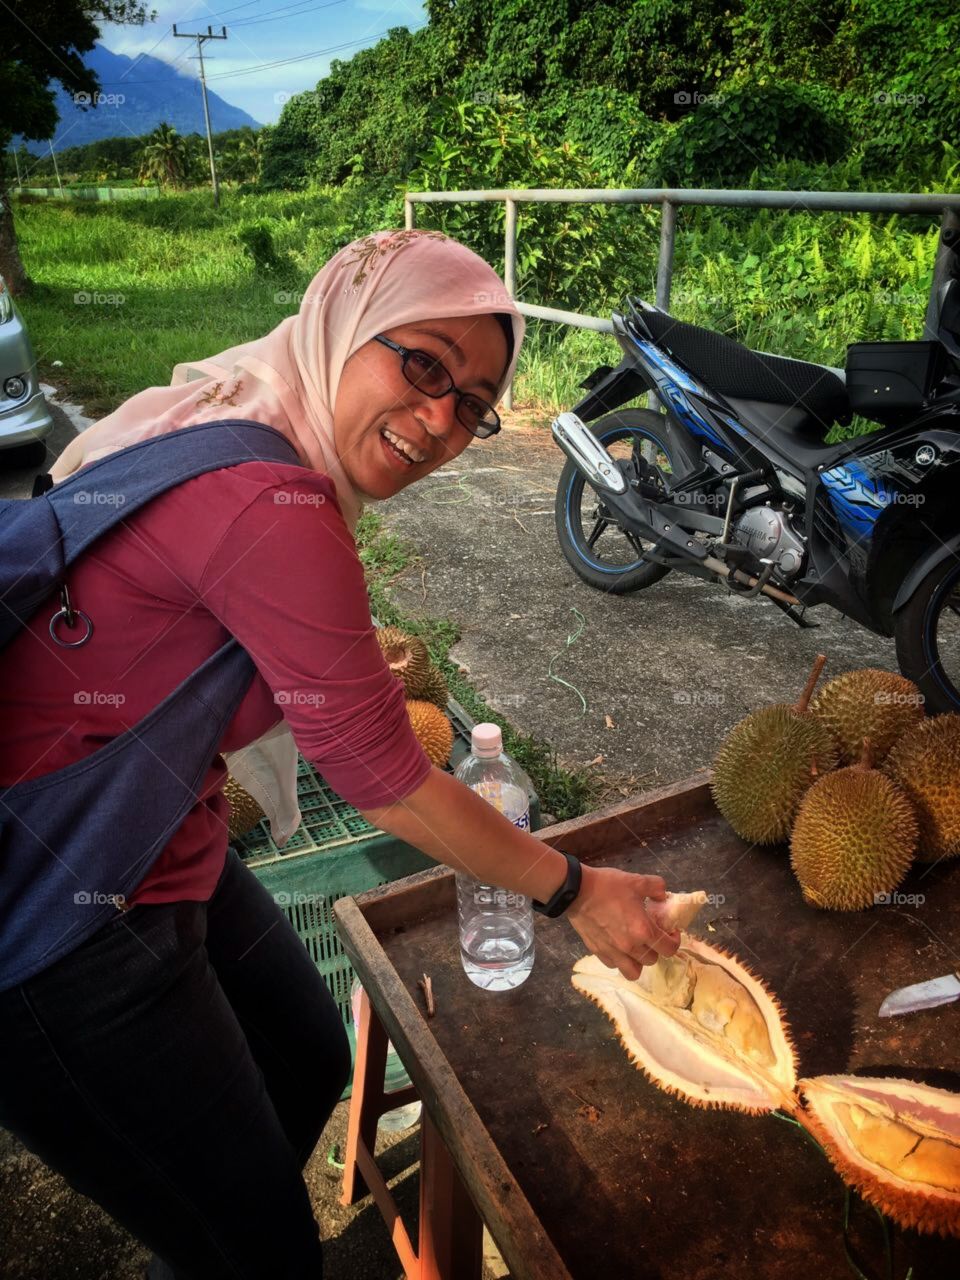 Durian day out